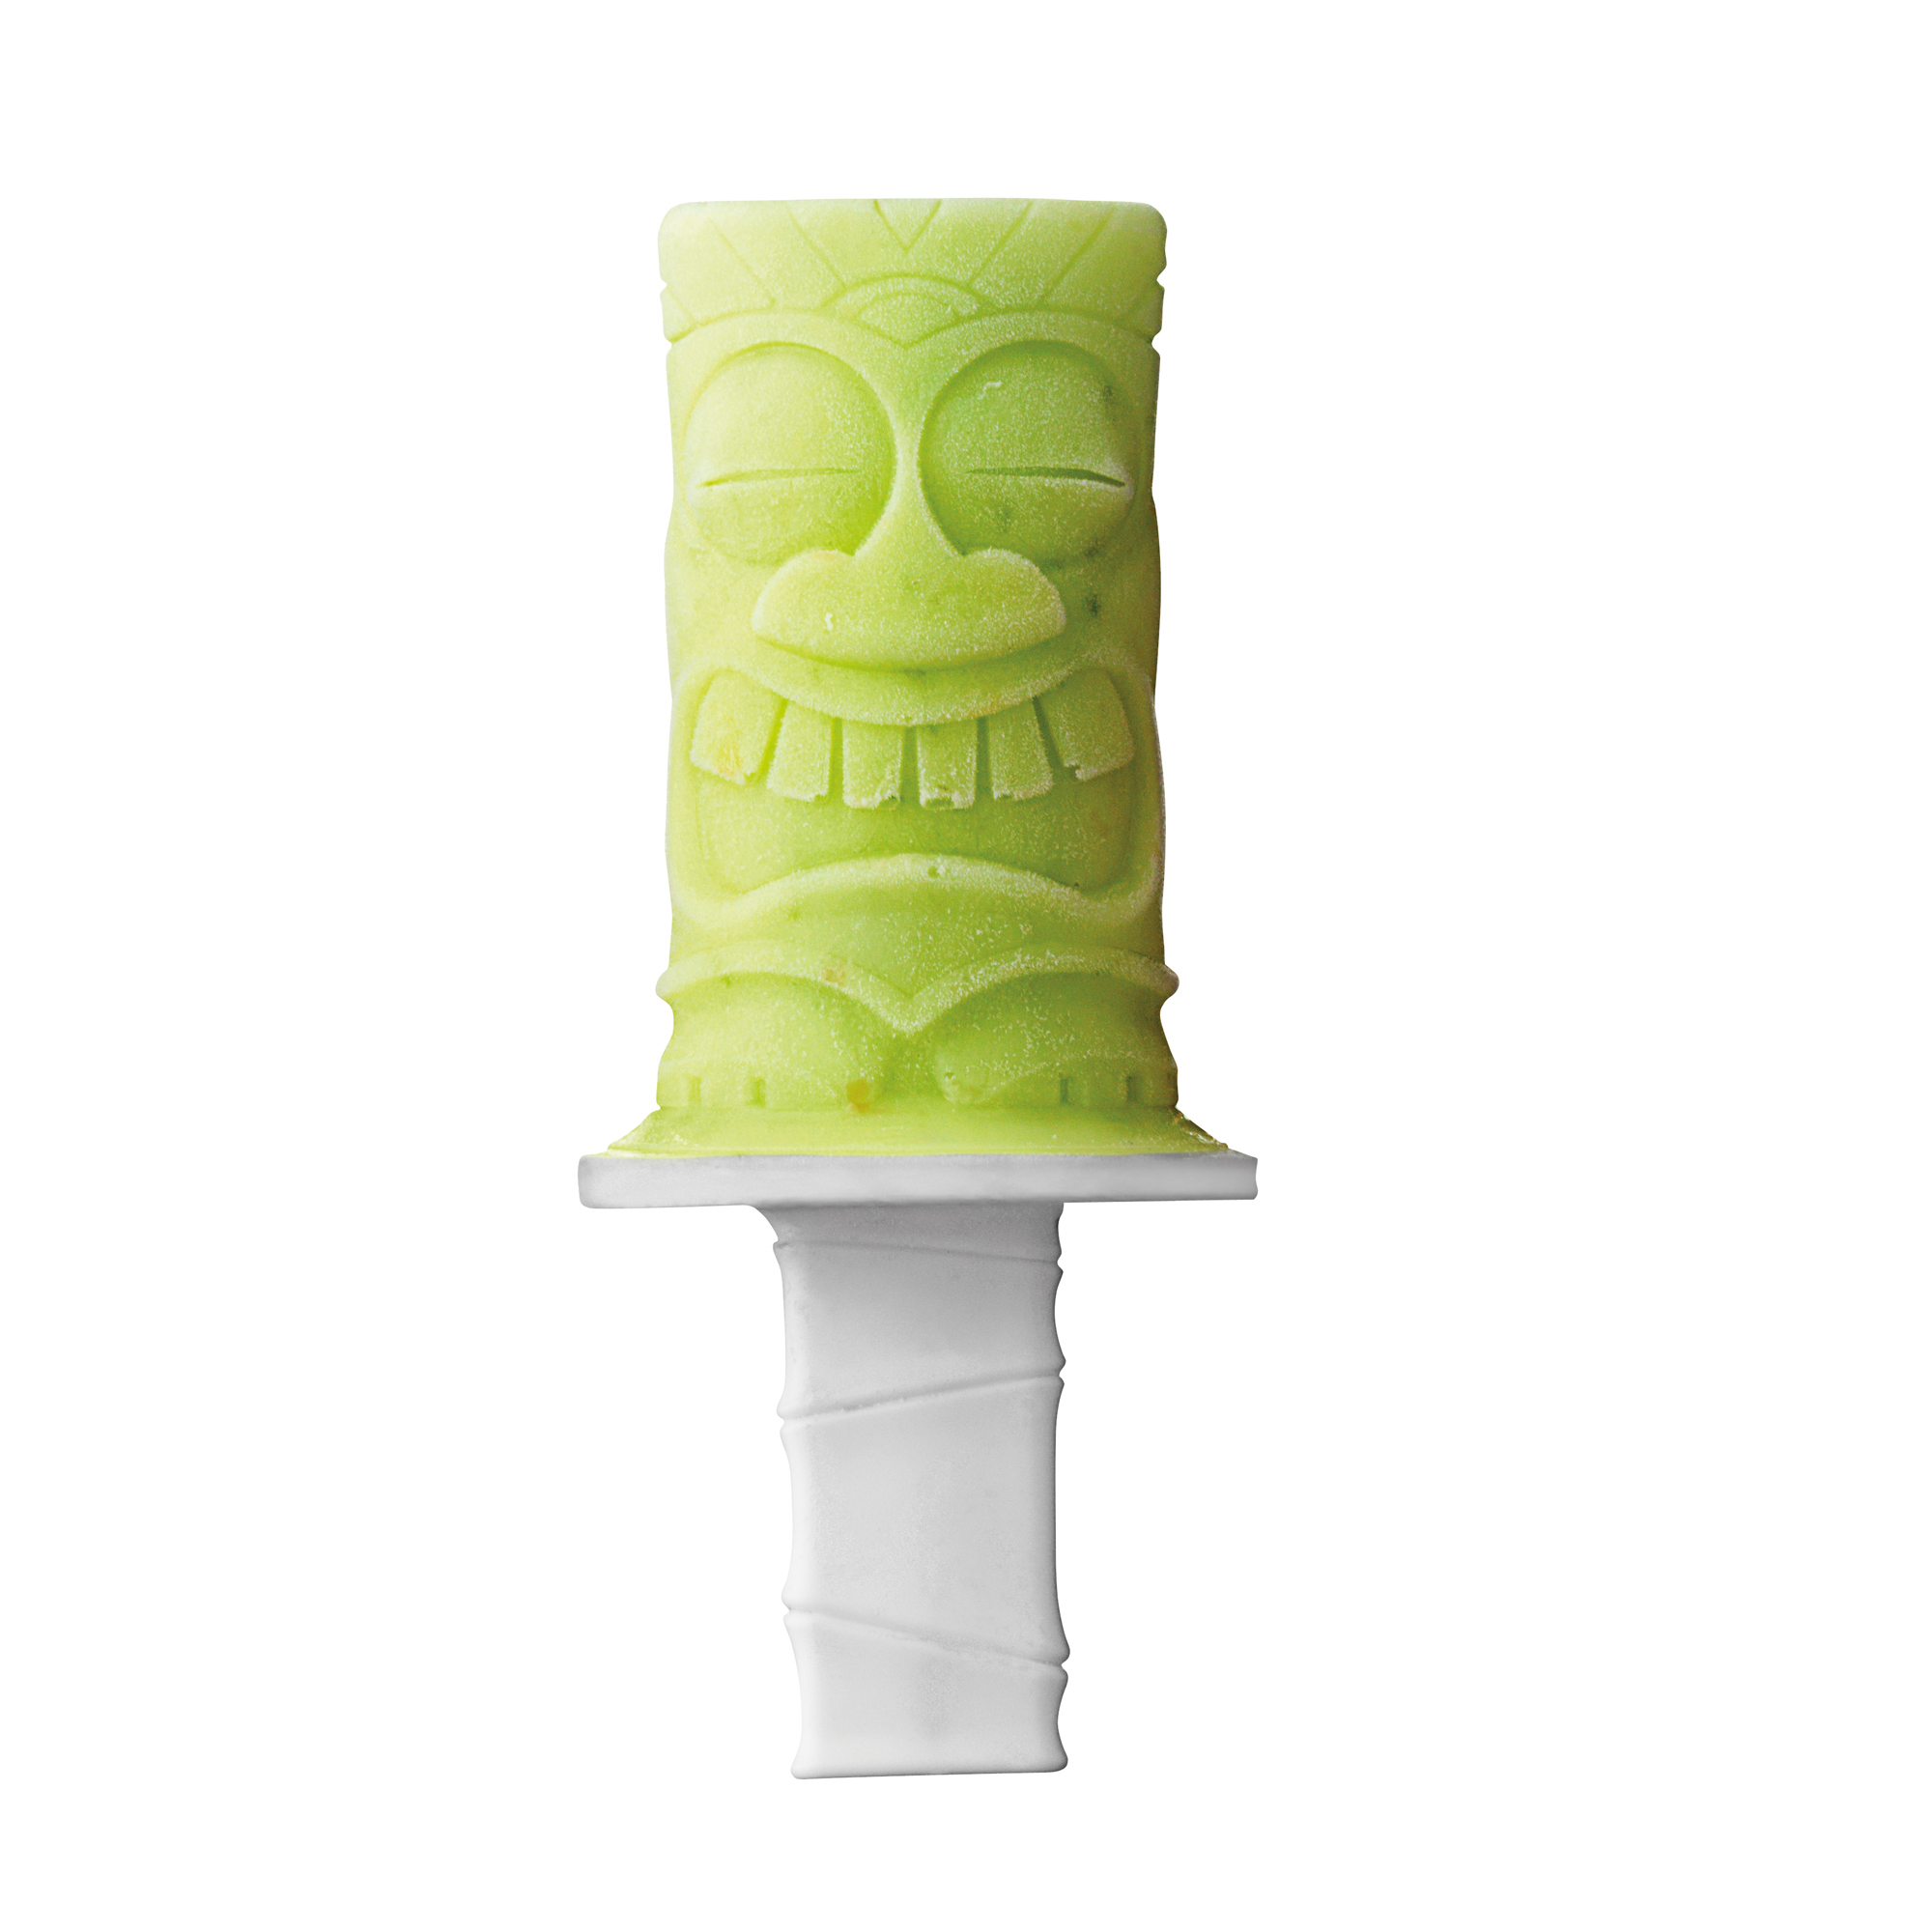 Tovolo Tikis Silicone Popsicle Molds Set with Base, Set of 4 - image 3 of 4